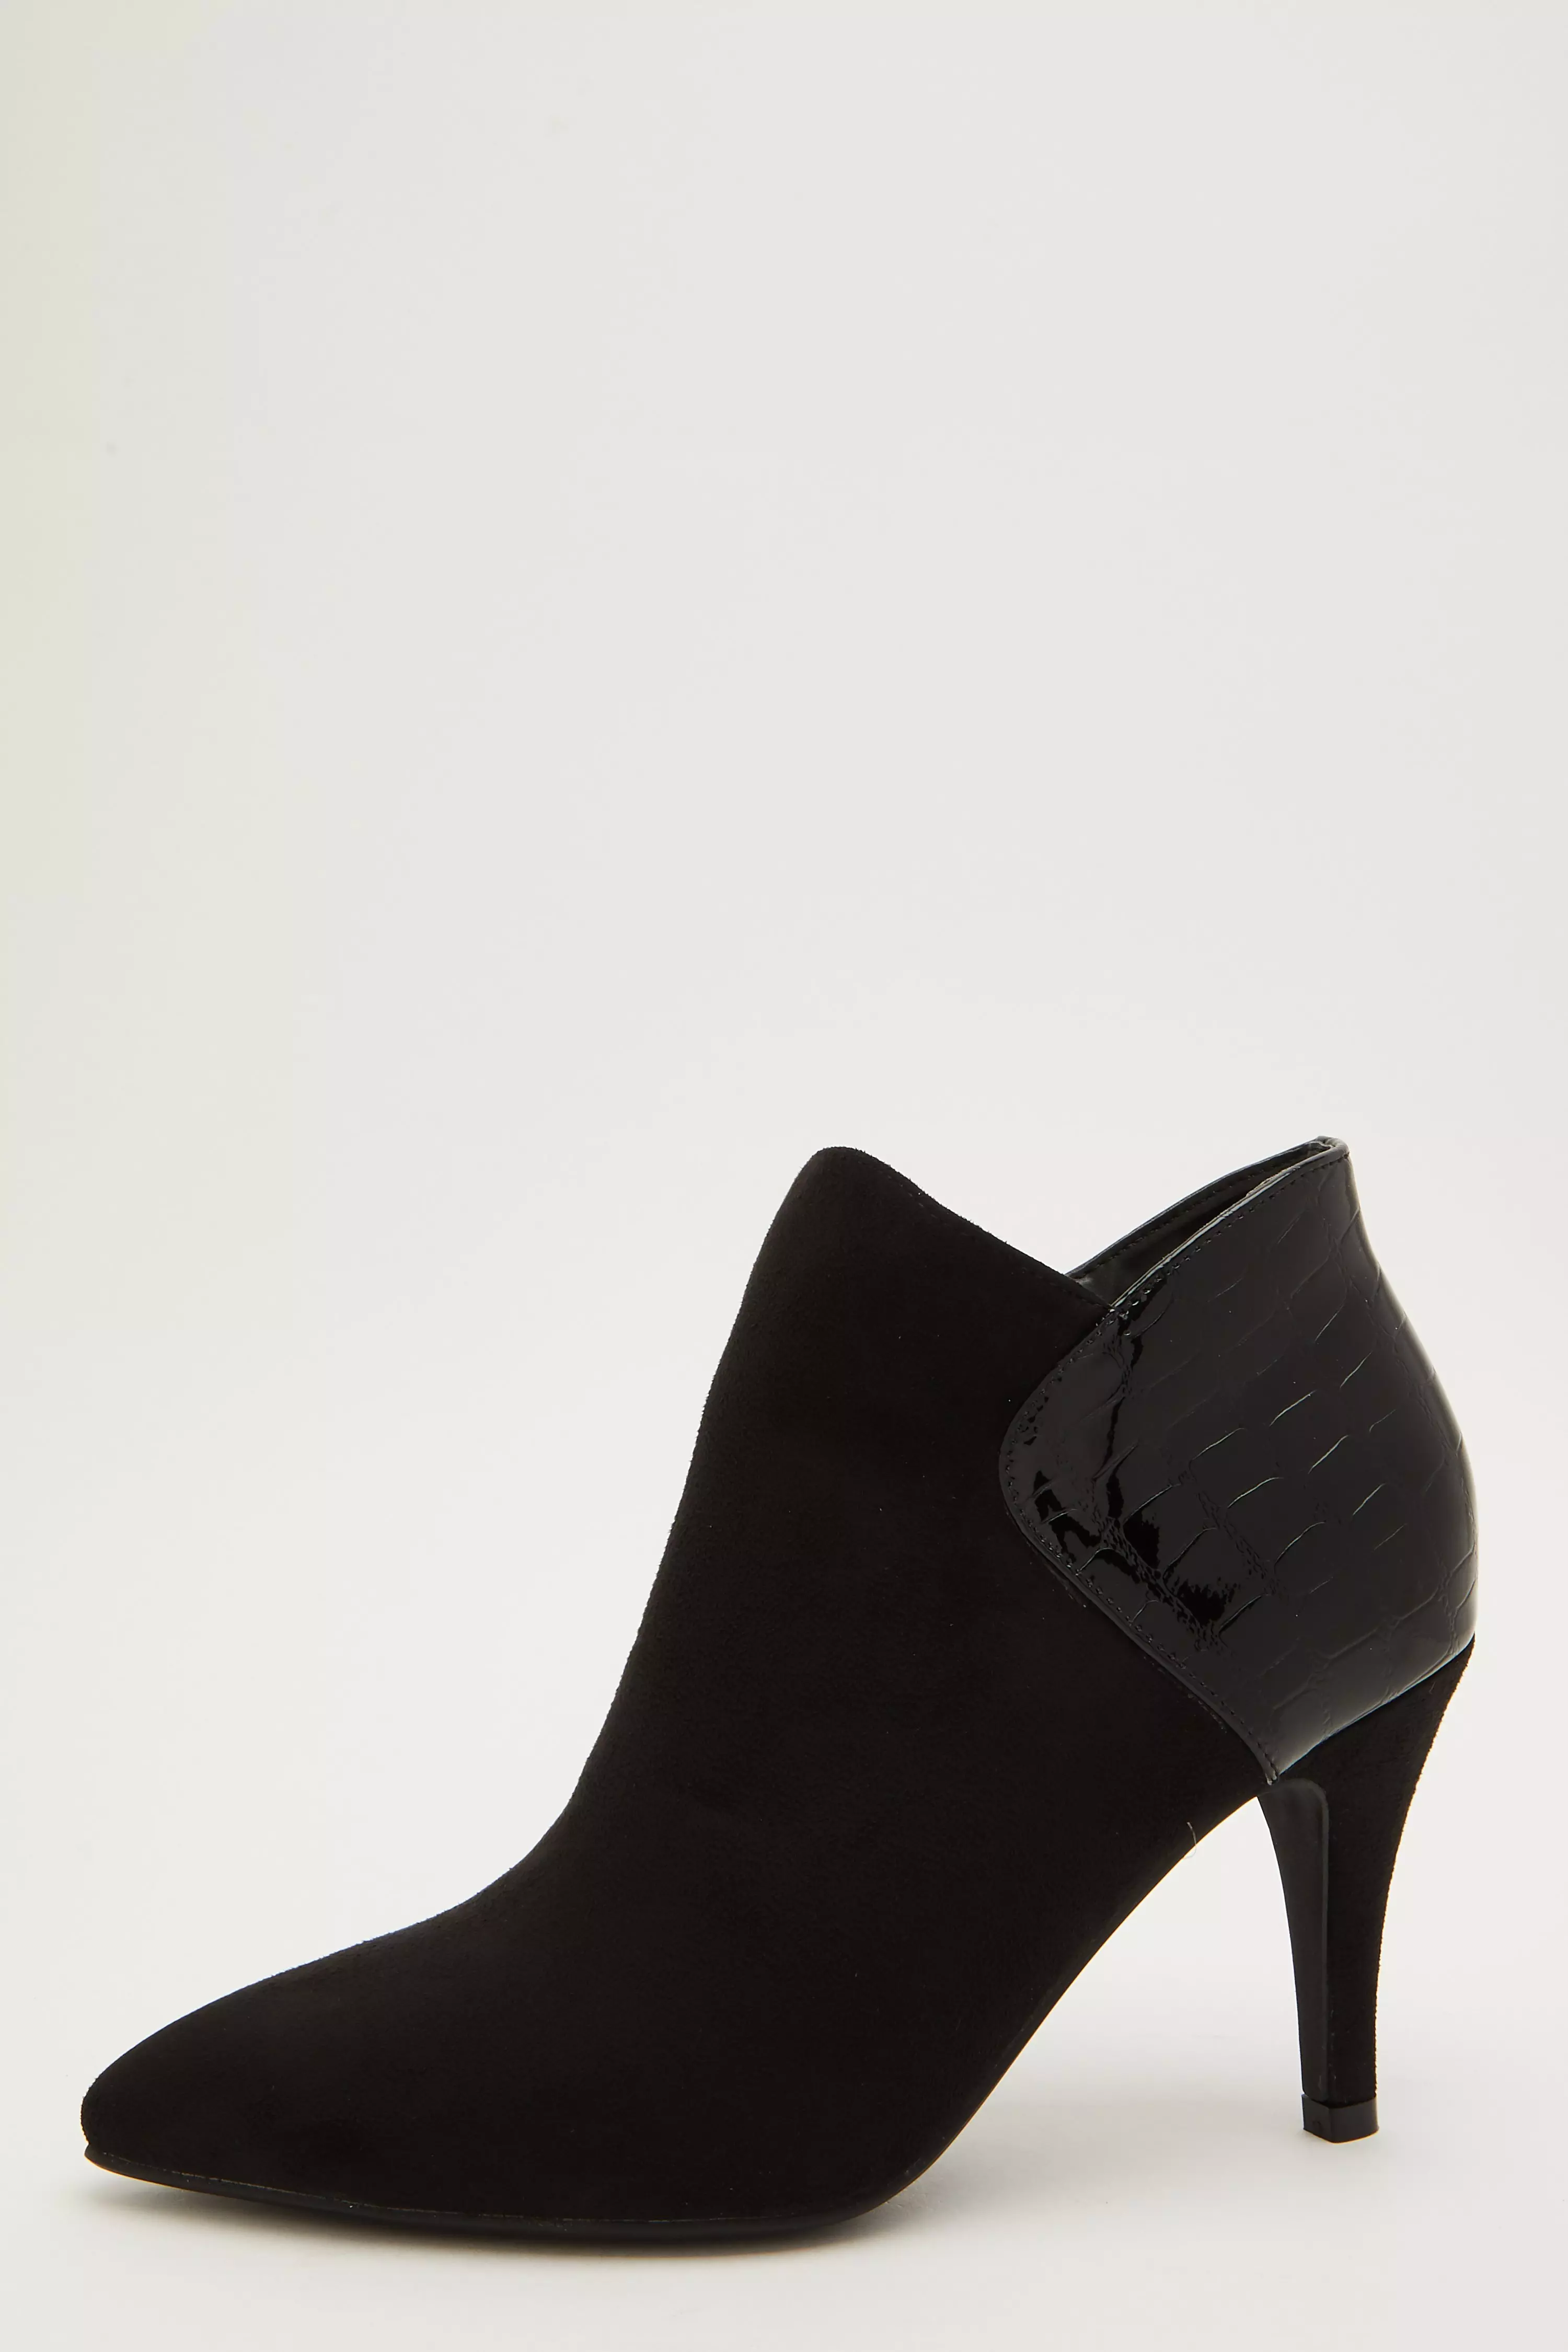 Black Faux Suede Heeled boot - QUIZ Clothing